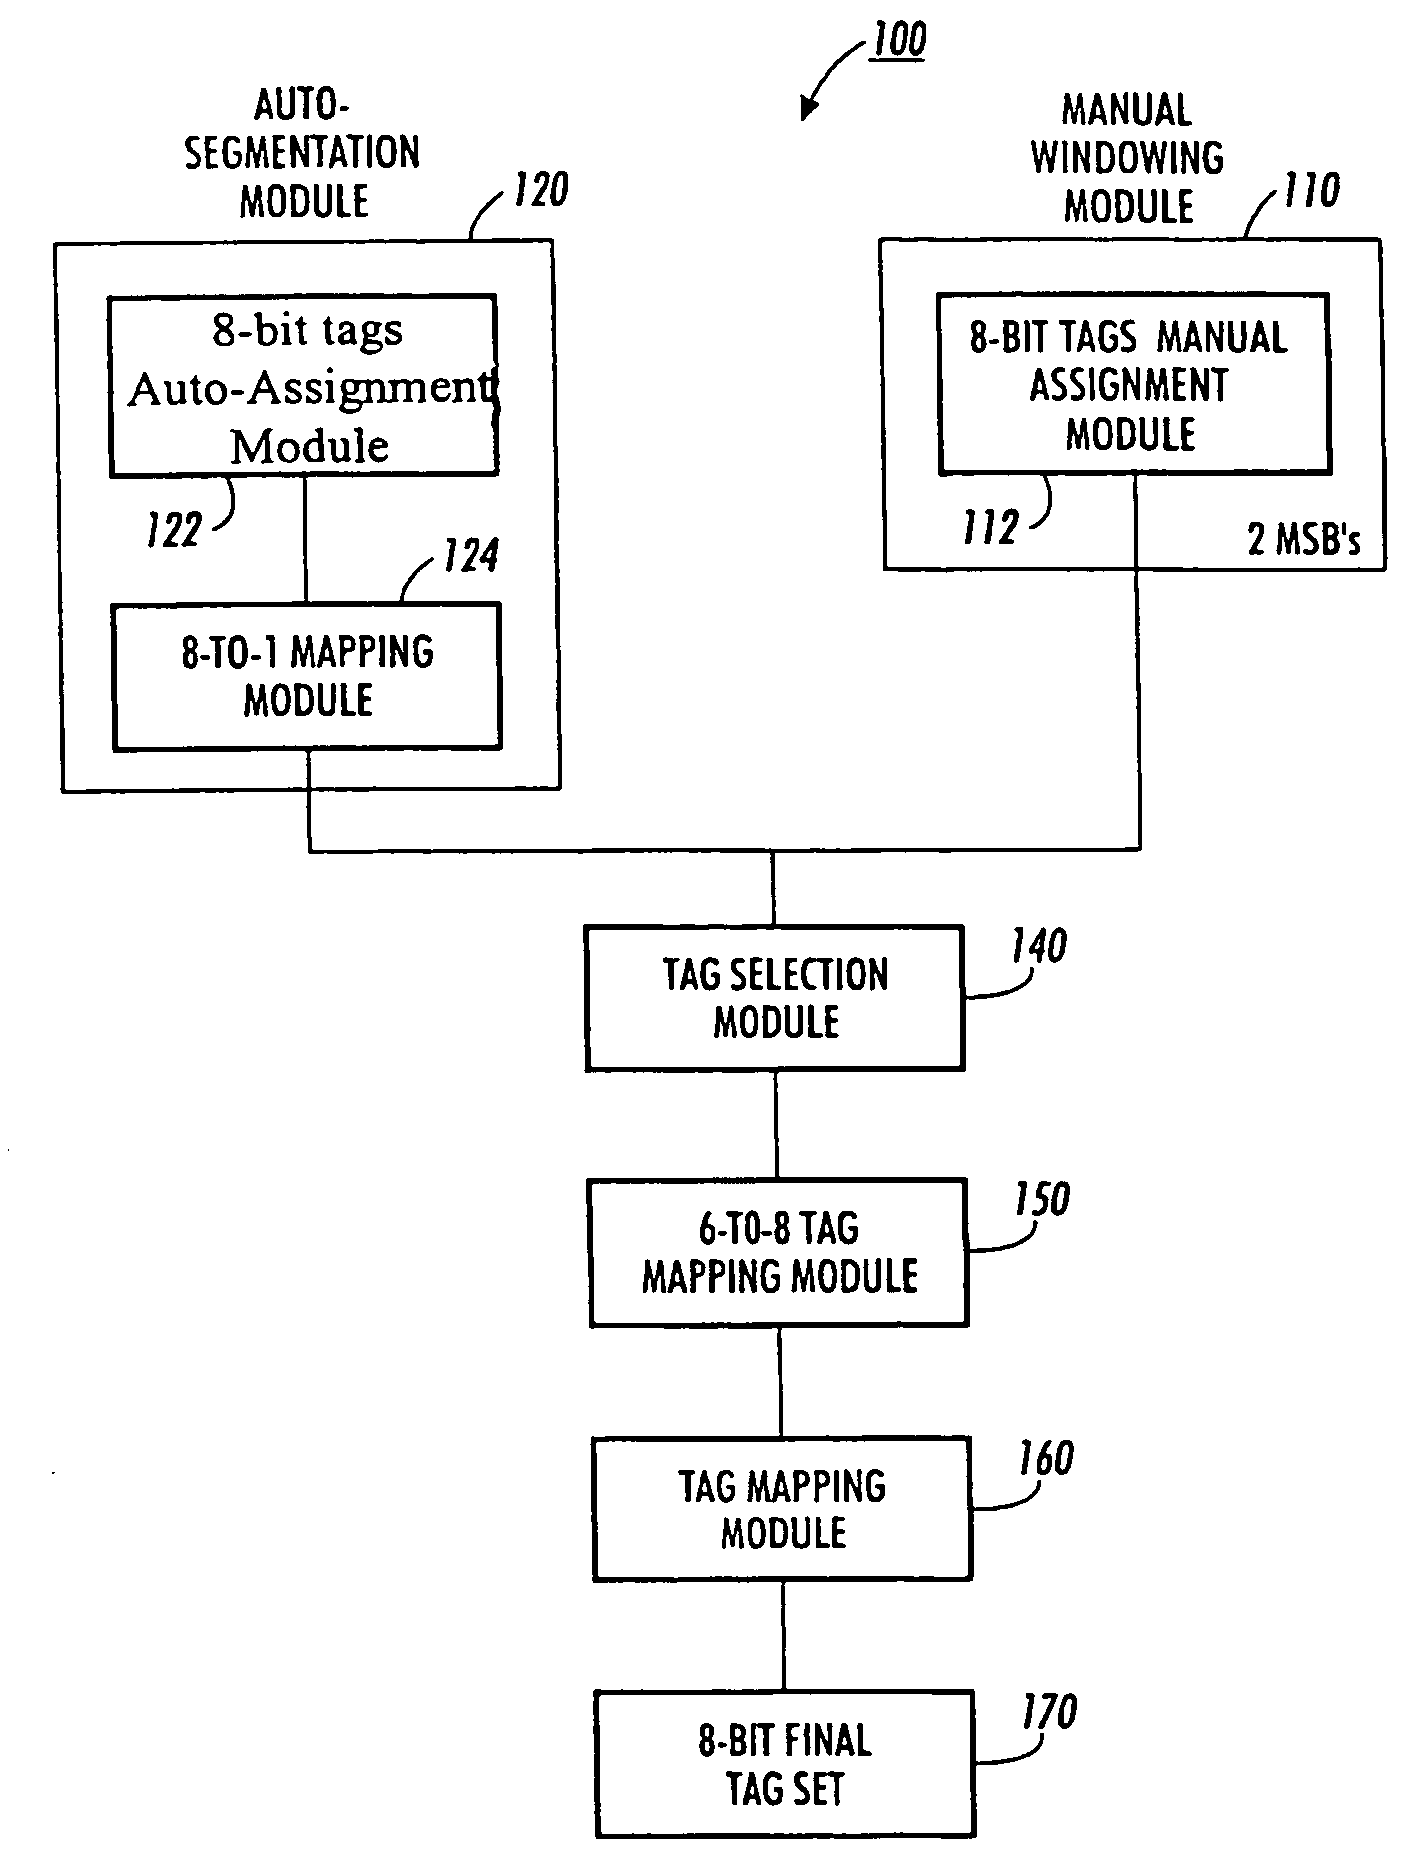 Manual windowing with auto-segmentation assistance in a scanning system